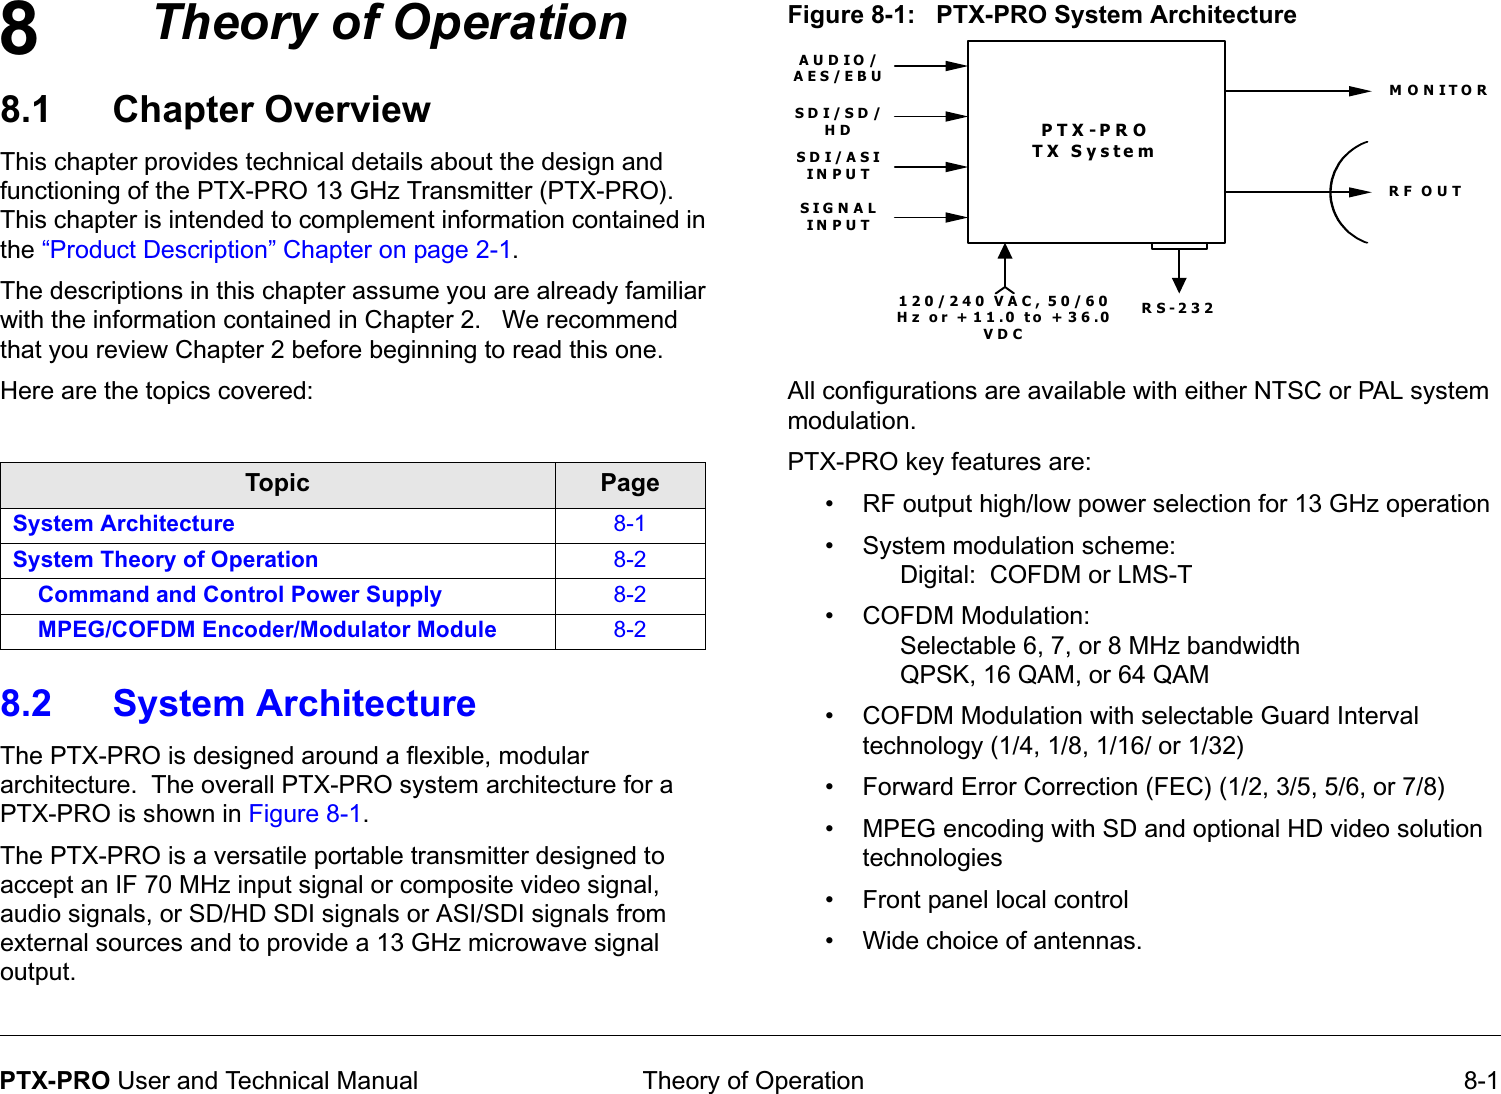 8 Theory of Operation 8-1PTX-PRO User and Technical ManualTheory of Operation8.1 Chapter OverviewThis chapter provides technical details about the design and functioning of the PTX-PRO 13 GHz Transmitter (PTX-PRO).  This chapter is intended to complement information contained in the “Product Description” Chapter on page 2-1. The descriptions in this chapter assume you are already familiar with the information contained in Chapter 2.   We recommend that you review Chapter 2 before beginning to read this one.Here are the topics covered:8.2 System Architecture  The PTX-PRO is designed around a flexible, modular architecture.  The overall PTX-PRO system architecture for a PTX-PRO is shown in Figure 8-1.The PTX-PRO is a versatile portable transmitter designed to accept an IF 70 MHz input signal or composite video signal, audio signals, or SD/HD SDI signals or ASI/SDI signals from external sources and to provide a 13 GHz microwave signal output.Topic PageSystem Architecture 8-1System Theory of Operation 8-2Command and Control Power Supply 8-2MPEG/COFDM Encoder/Modulator Module 8-2Figure 8-1:   PTX-PRO System ArchitectureAll configurations are available with either NTSC or PAL system modulation. PTX-PRO key features are:• RF output high/low power selection for 13 GHz operation • System modulation scheme:Digital:  COFDM or LMS-T• COFDM Modulation: Selectable 6, 7, or 8 MHz bandwidthQPSK, 16 QAM, or 64 QAM• COFDM Modulation with selectable Guard Interval technology (1/4, 1/8, 1/16/ or 1/32)• Forward Error Correction (FEC) (1/2, 3/5, 5/6, or 7/8)• MPEG encoding with SD and optional HD video solution technologies• Front panel local control• Wide choice of antennas.PTX-PRO TX SystemRS-232120/240 VAC, 50/60 Hz or +11.0 to +36.0 VDCAUDIO/AES/EBURF OUTMONITORSDI/SD/HDSD I/ASI IN PU TSIGNAL IN PU T